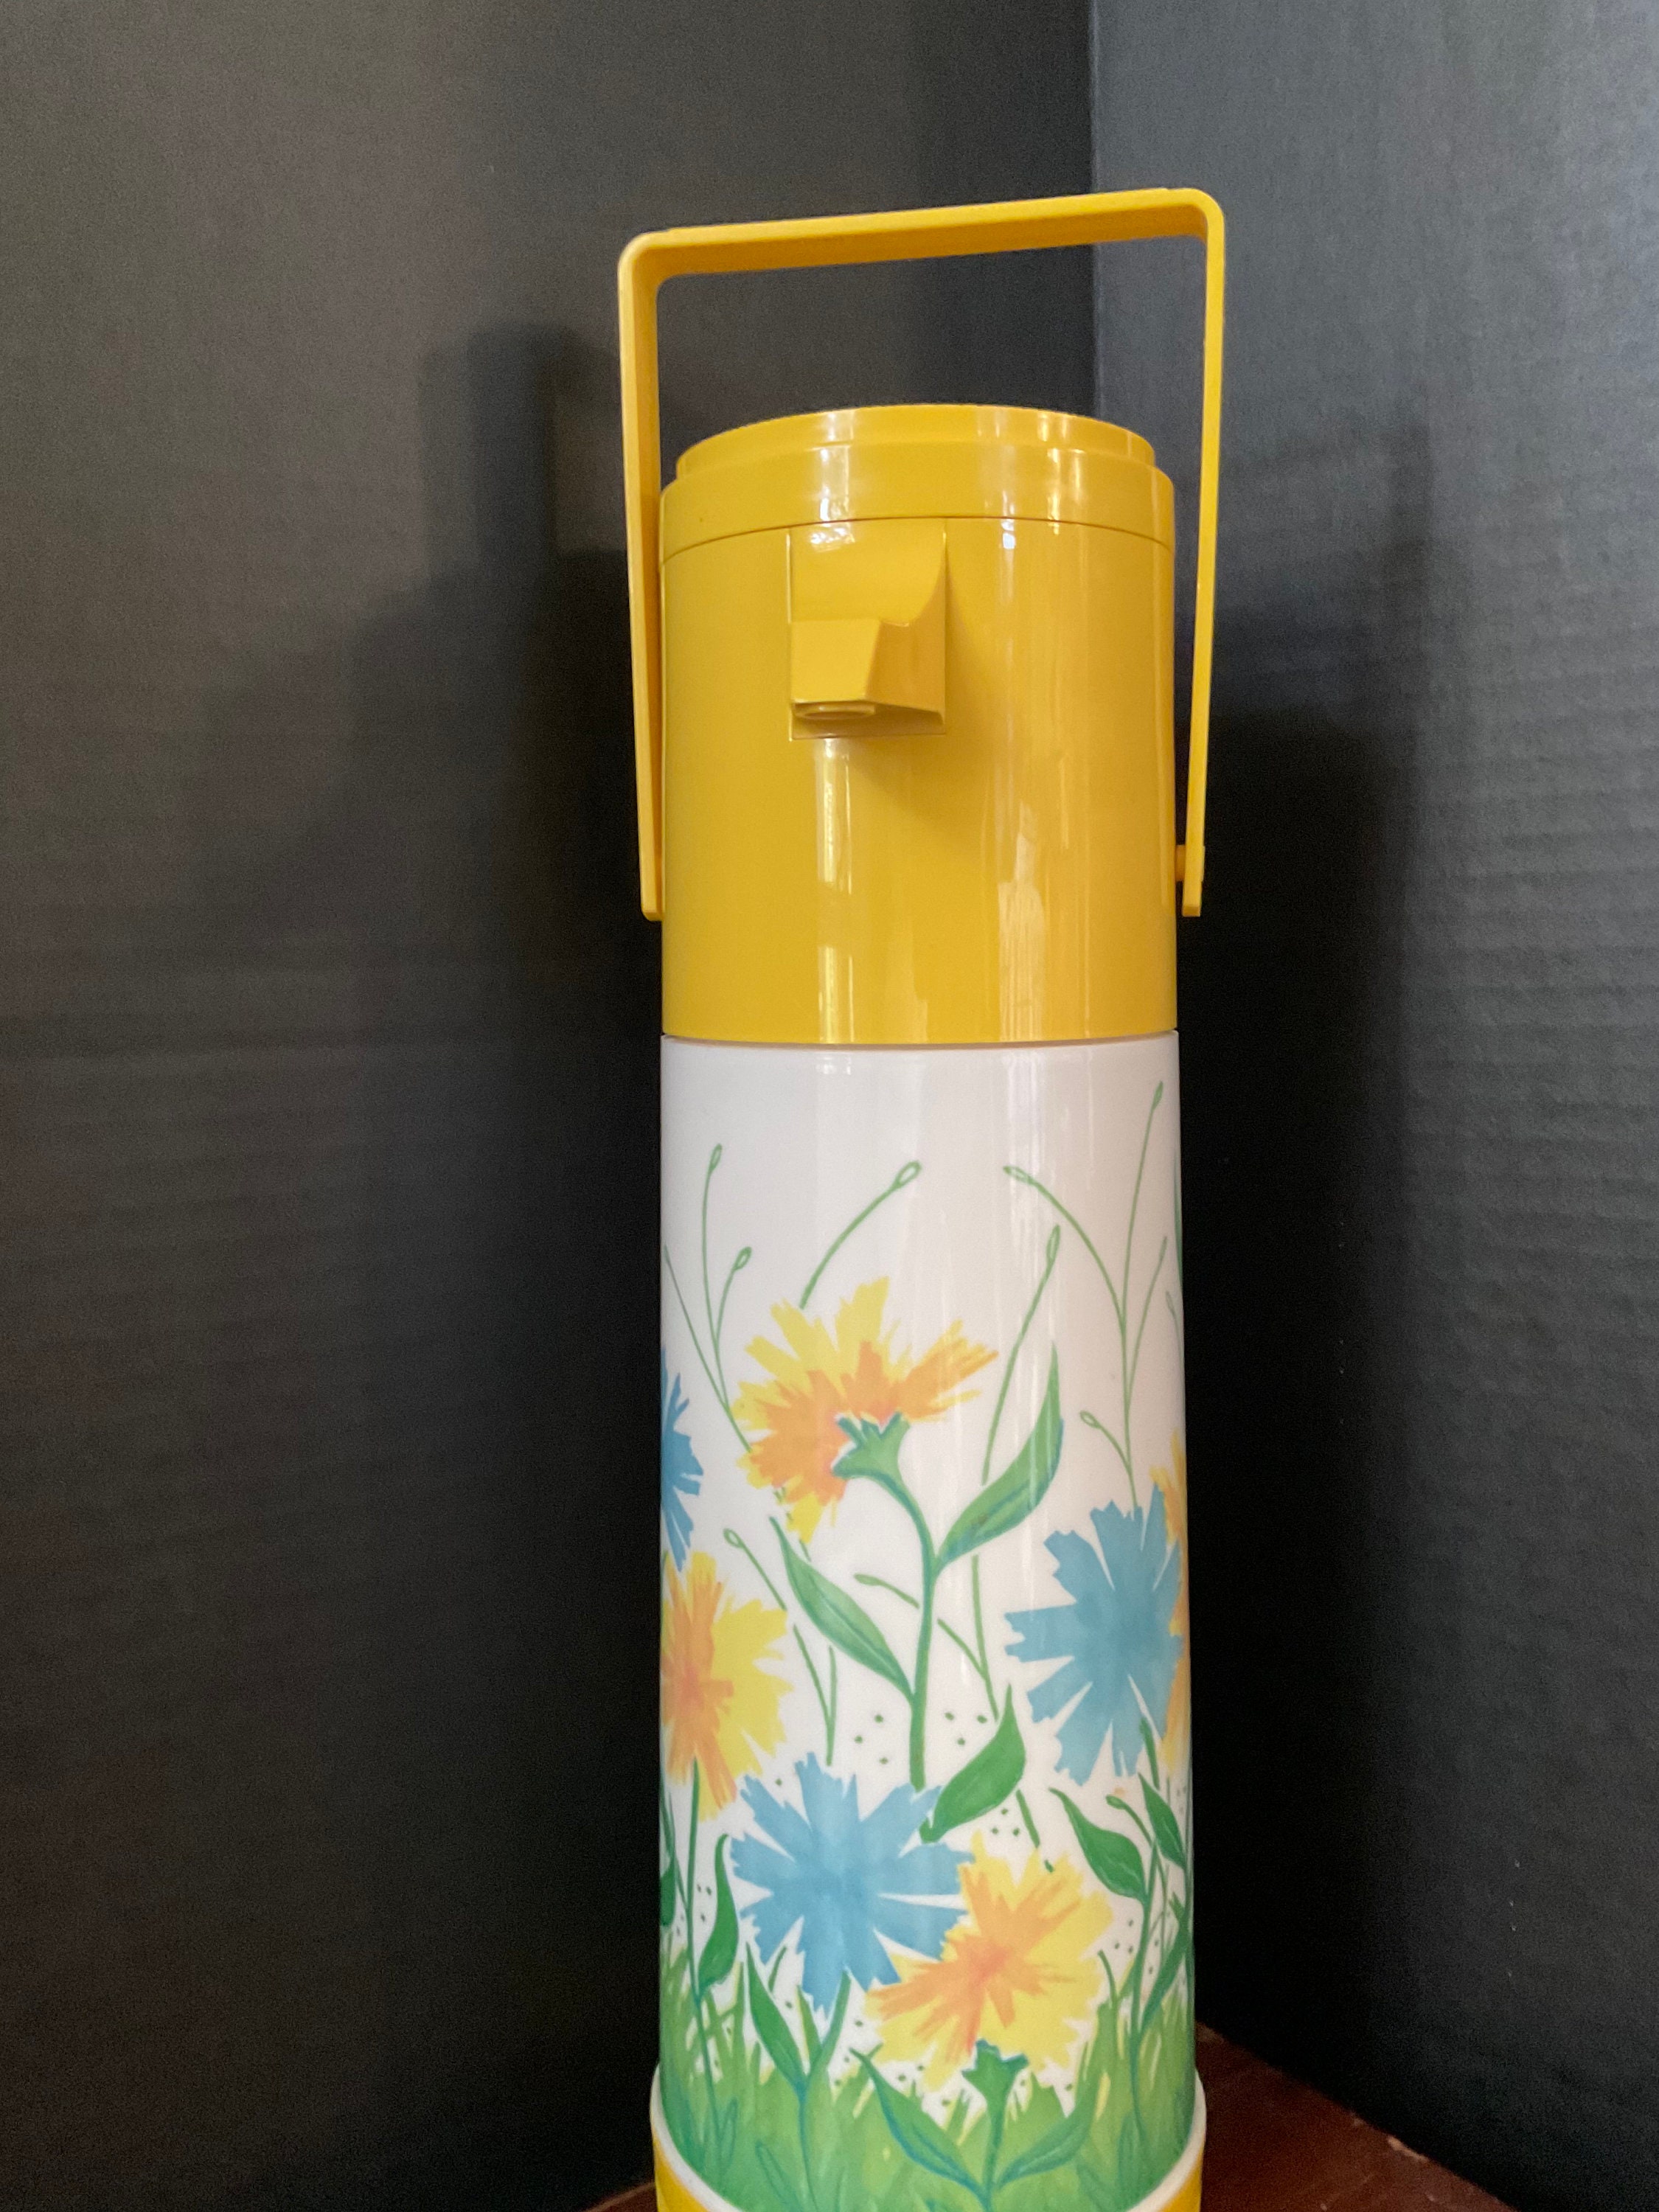 Vintage Wildflower Thermos / Coffee Carafe / Beverage Dispenser / Yellow  Thermos / 70s Floral 